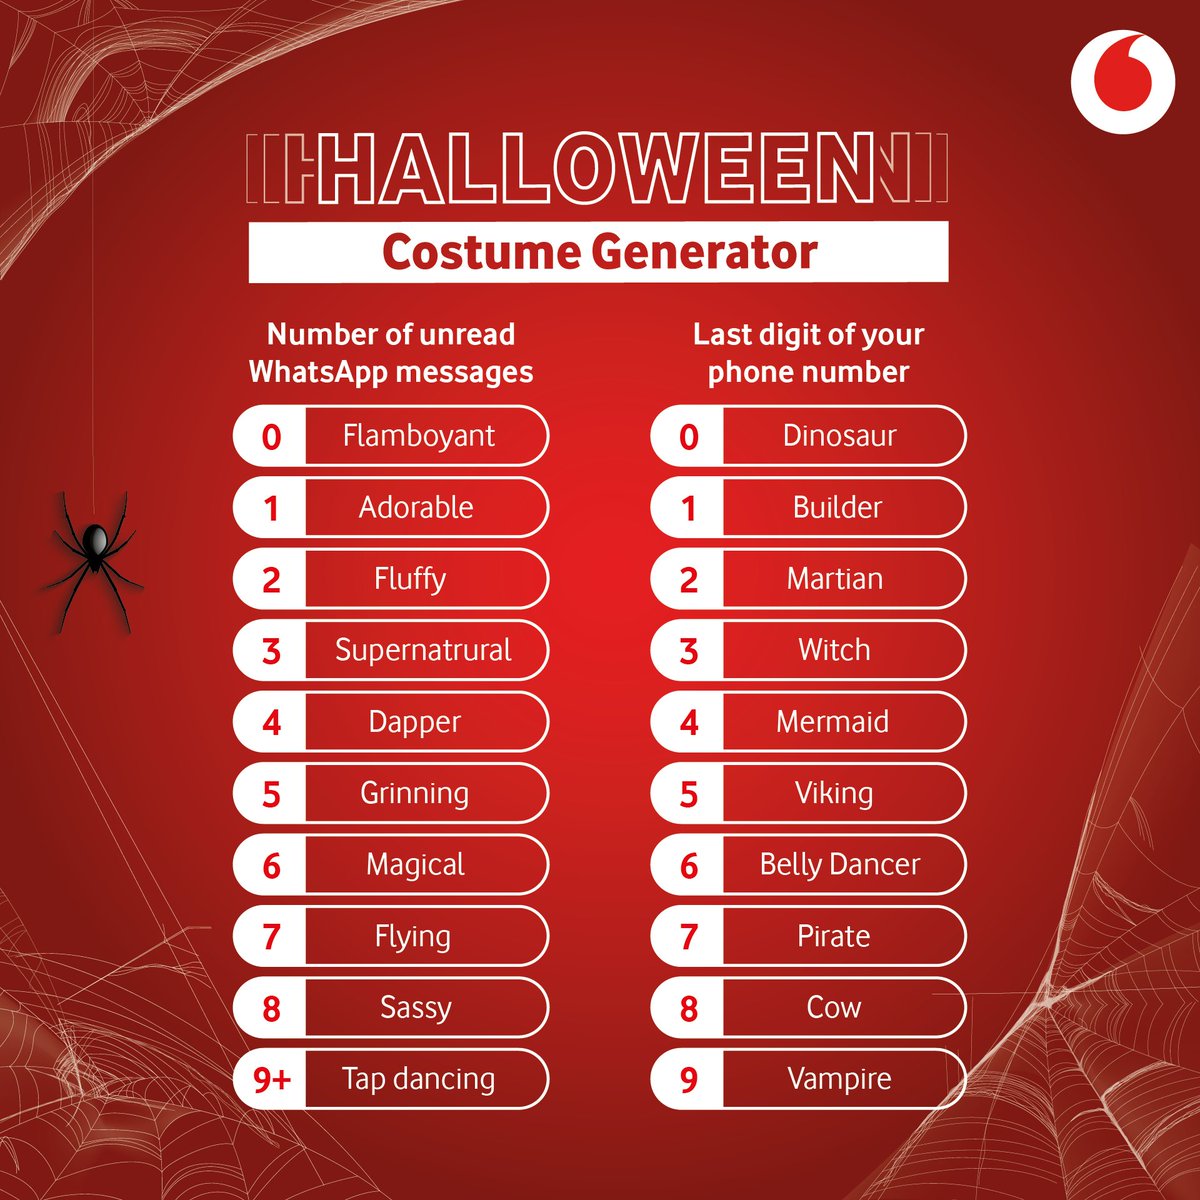 Can't decide on a #Halloween costume? We've got you covered 🧛✅ Tell us yours and we could surprise you with #VodafoneTreats (no tricks)